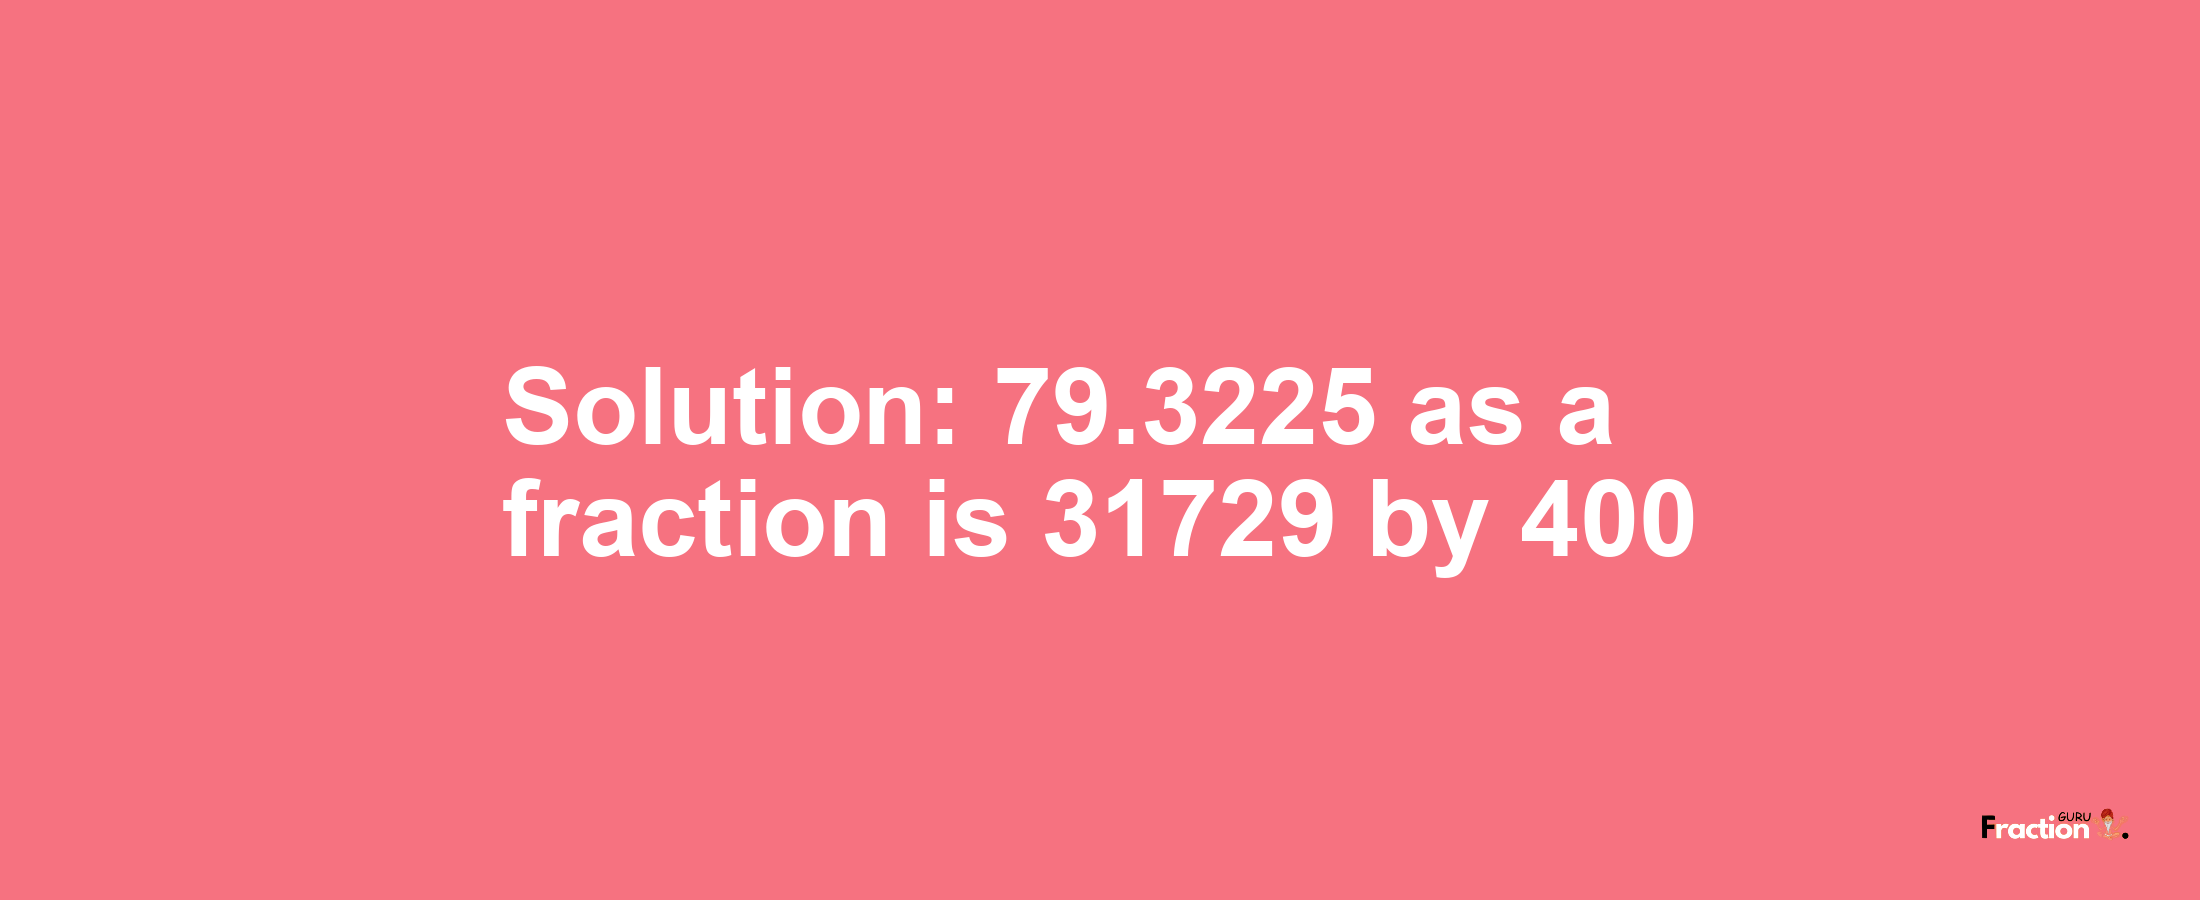 Solution:79.3225 as a fraction is 31729/400